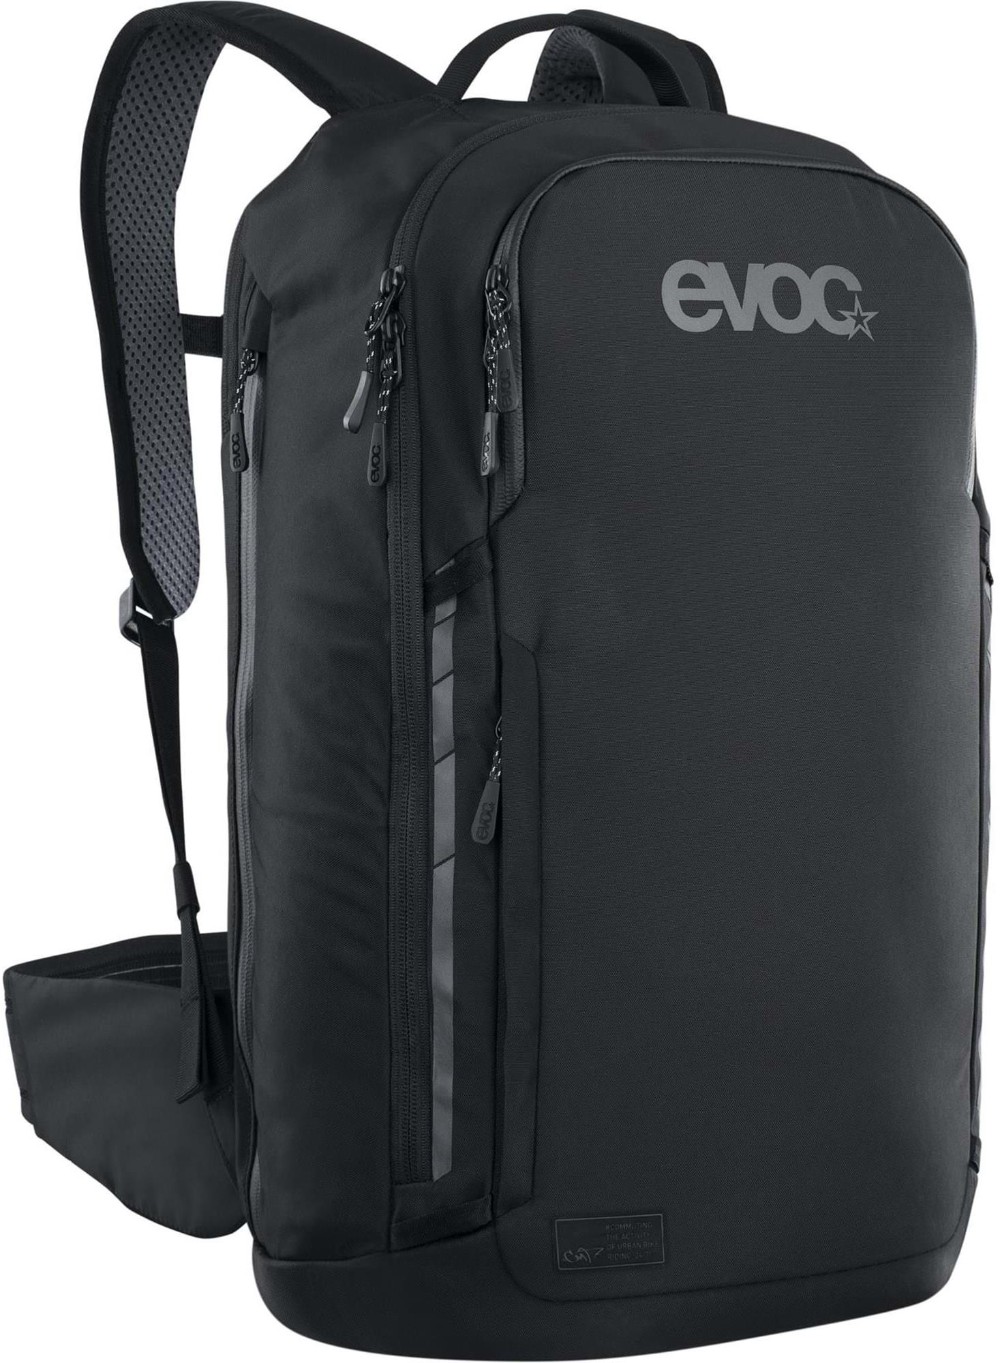 Commute Pro 22L Protector Backpack image 0